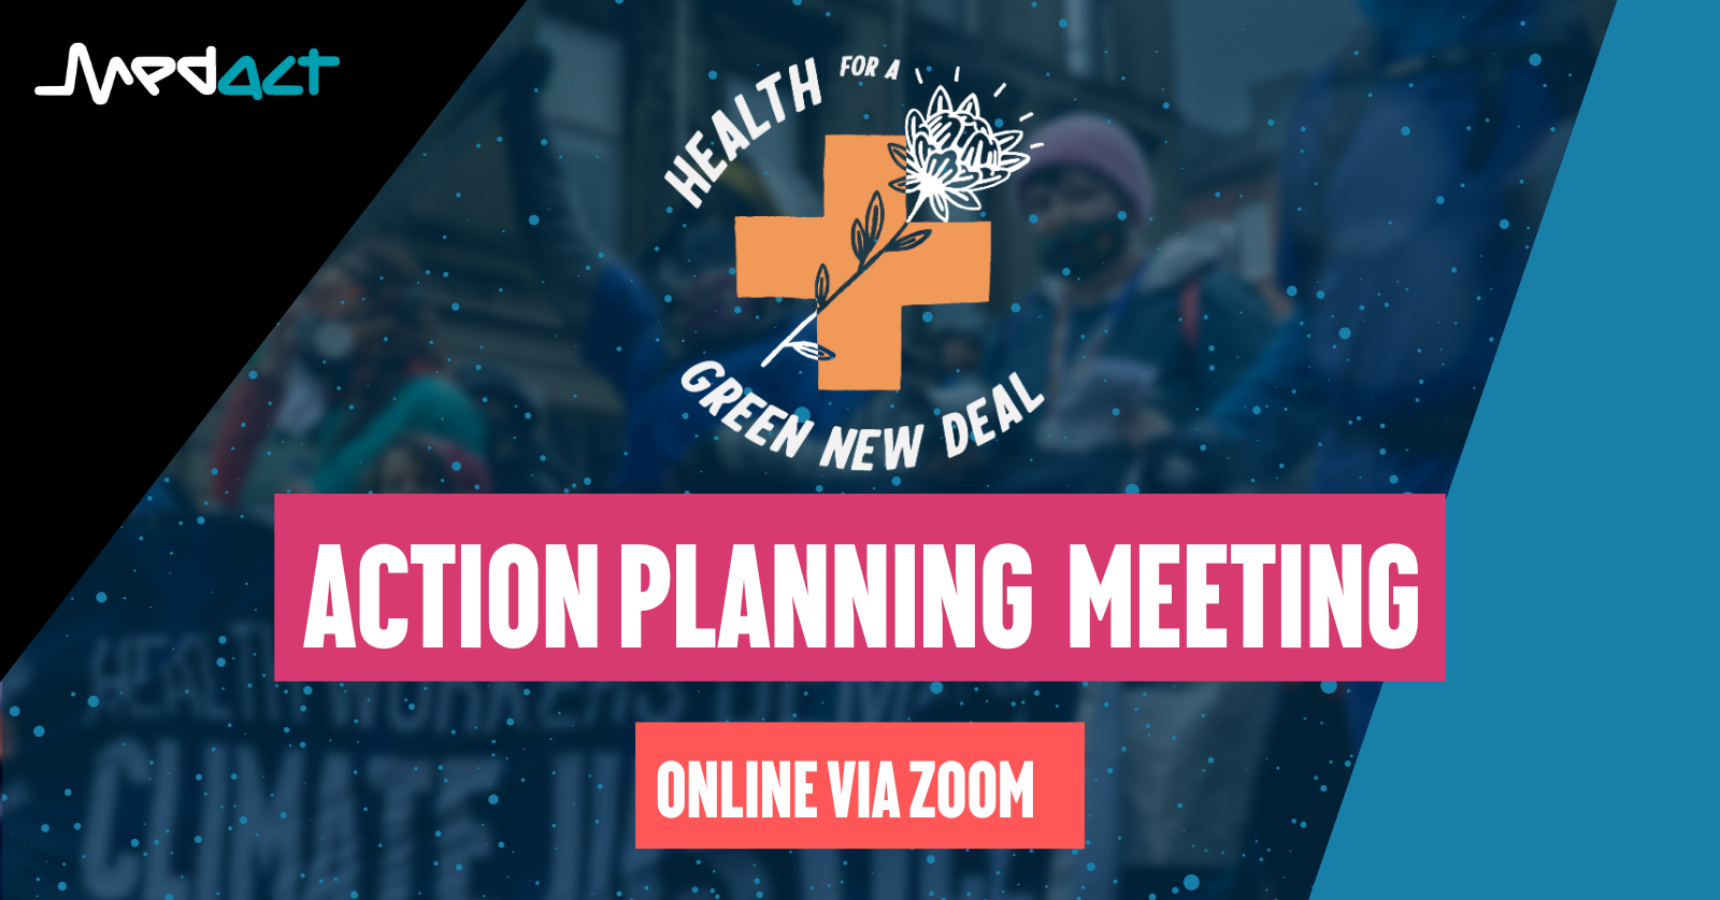 Health for a Green New Deal: March Action Planning Meeting